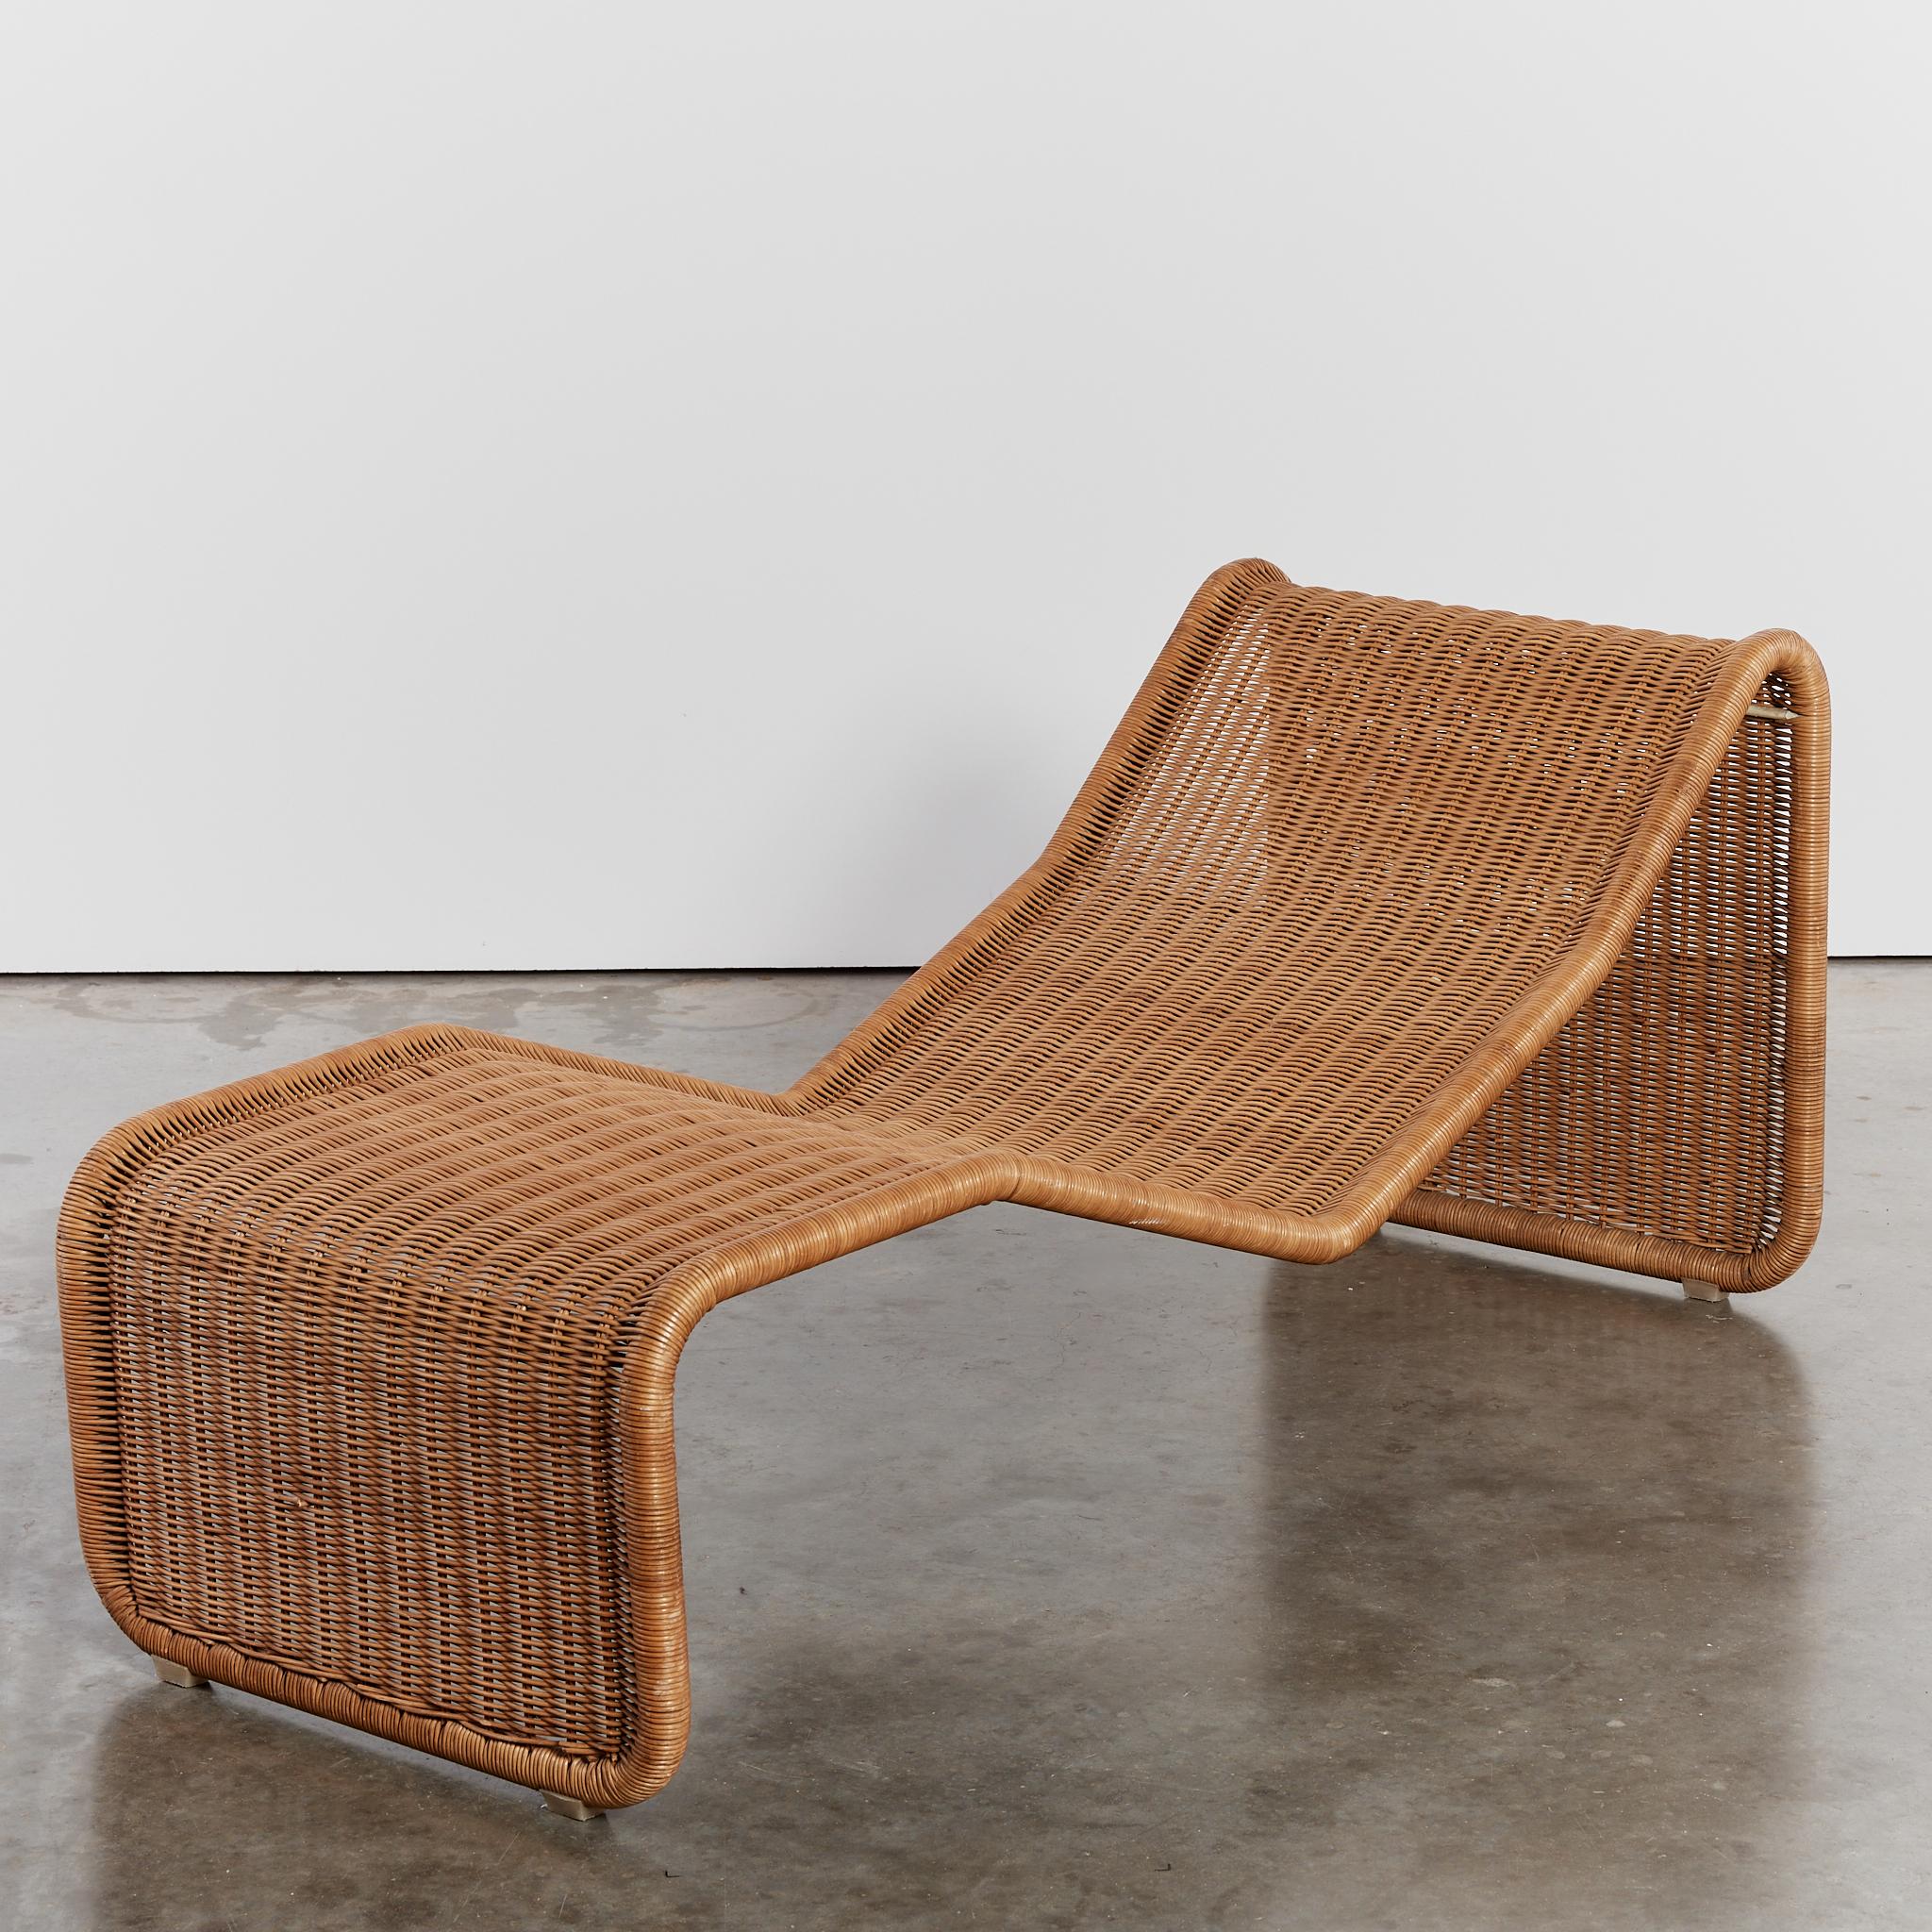 Rare P3 rattan chaise lounge chair by Tito Agnoli for Bocacina 1960's For Sale 2